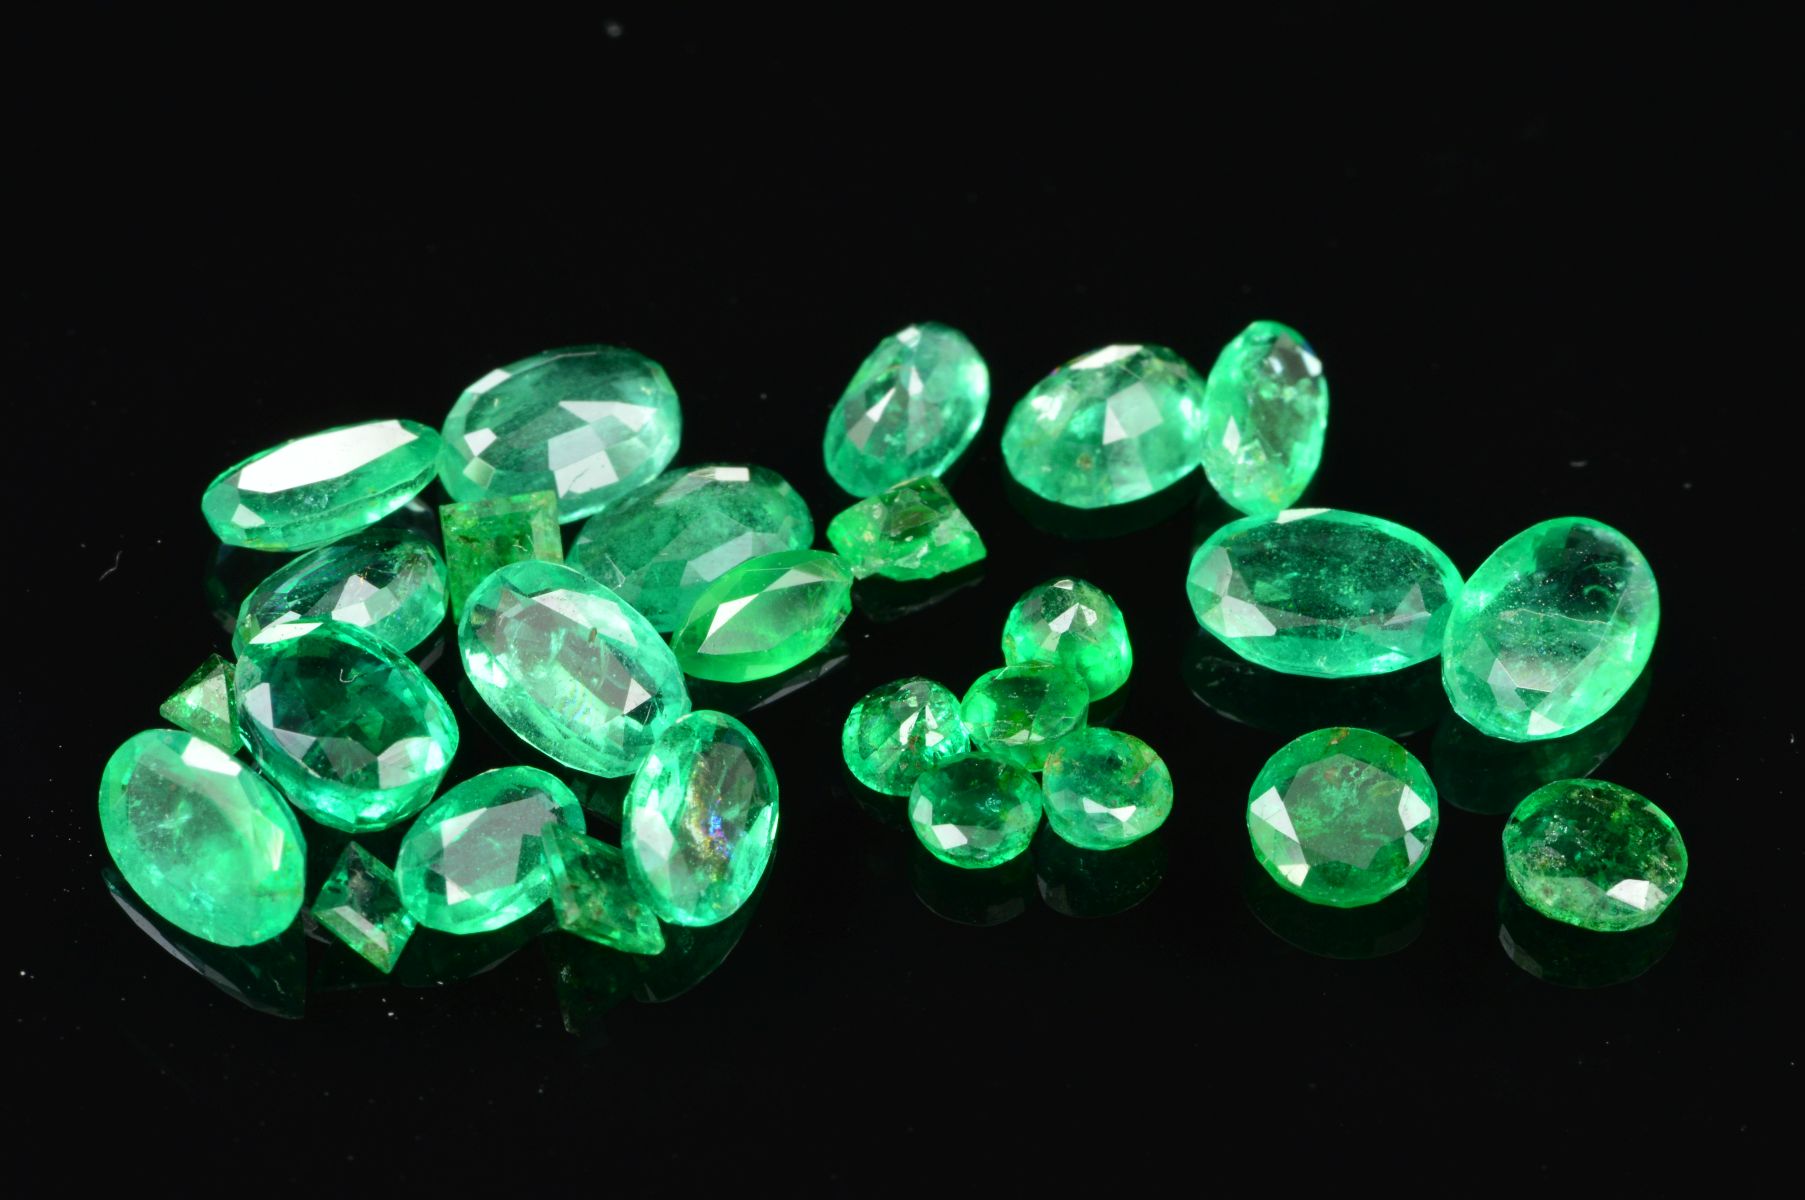 A COLLECTION OF VARI-CUT EMERALDS, sizes ranging from 0.03ct - 0.40ct, total weight 3.18ct, some